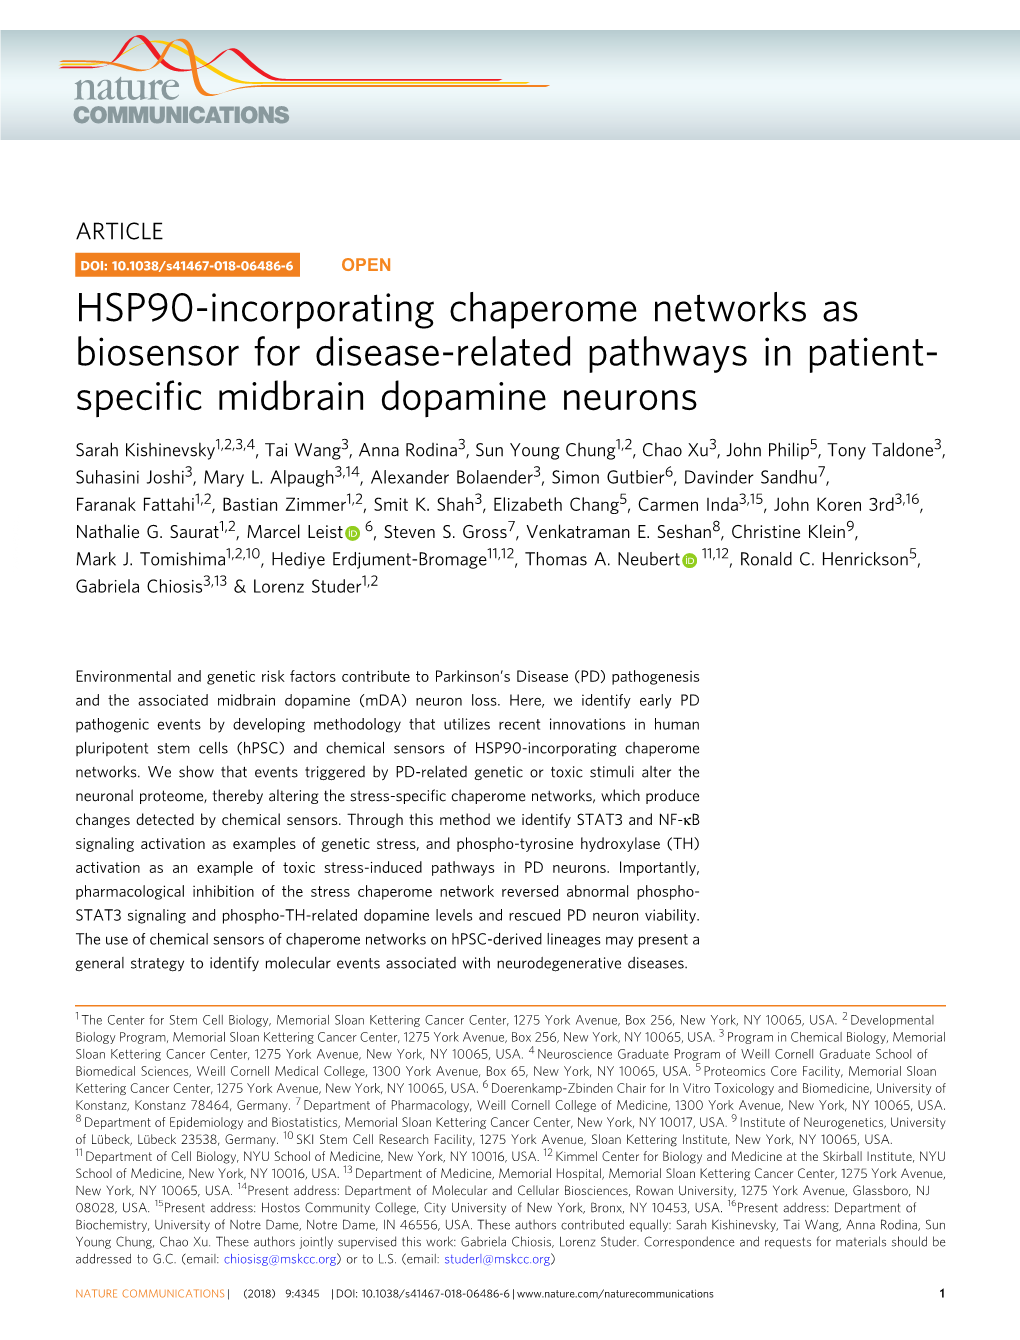 HSP90-Incorporating Chaperome Networks As Biosensor for Disease-Related Pathways in Patient- Speciﬁc Midbrain Dopamine Neurons